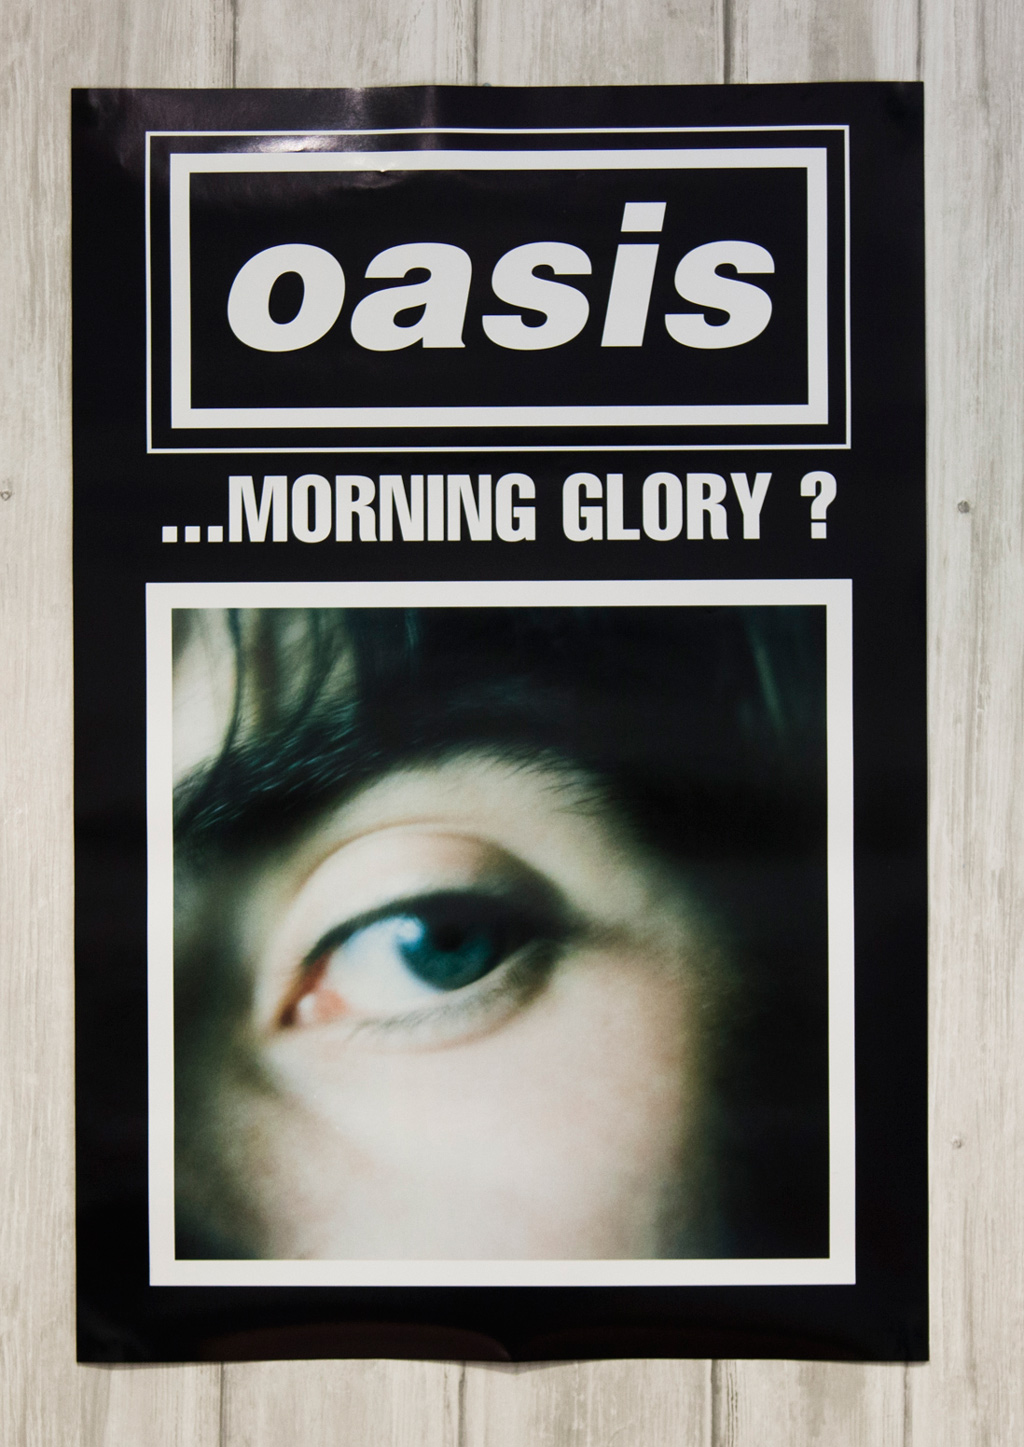 MORNING GLORY POSTER A4 A3 SIZE WHATS THE STORY BUY 2 GET ANY 2 FREE OASIS